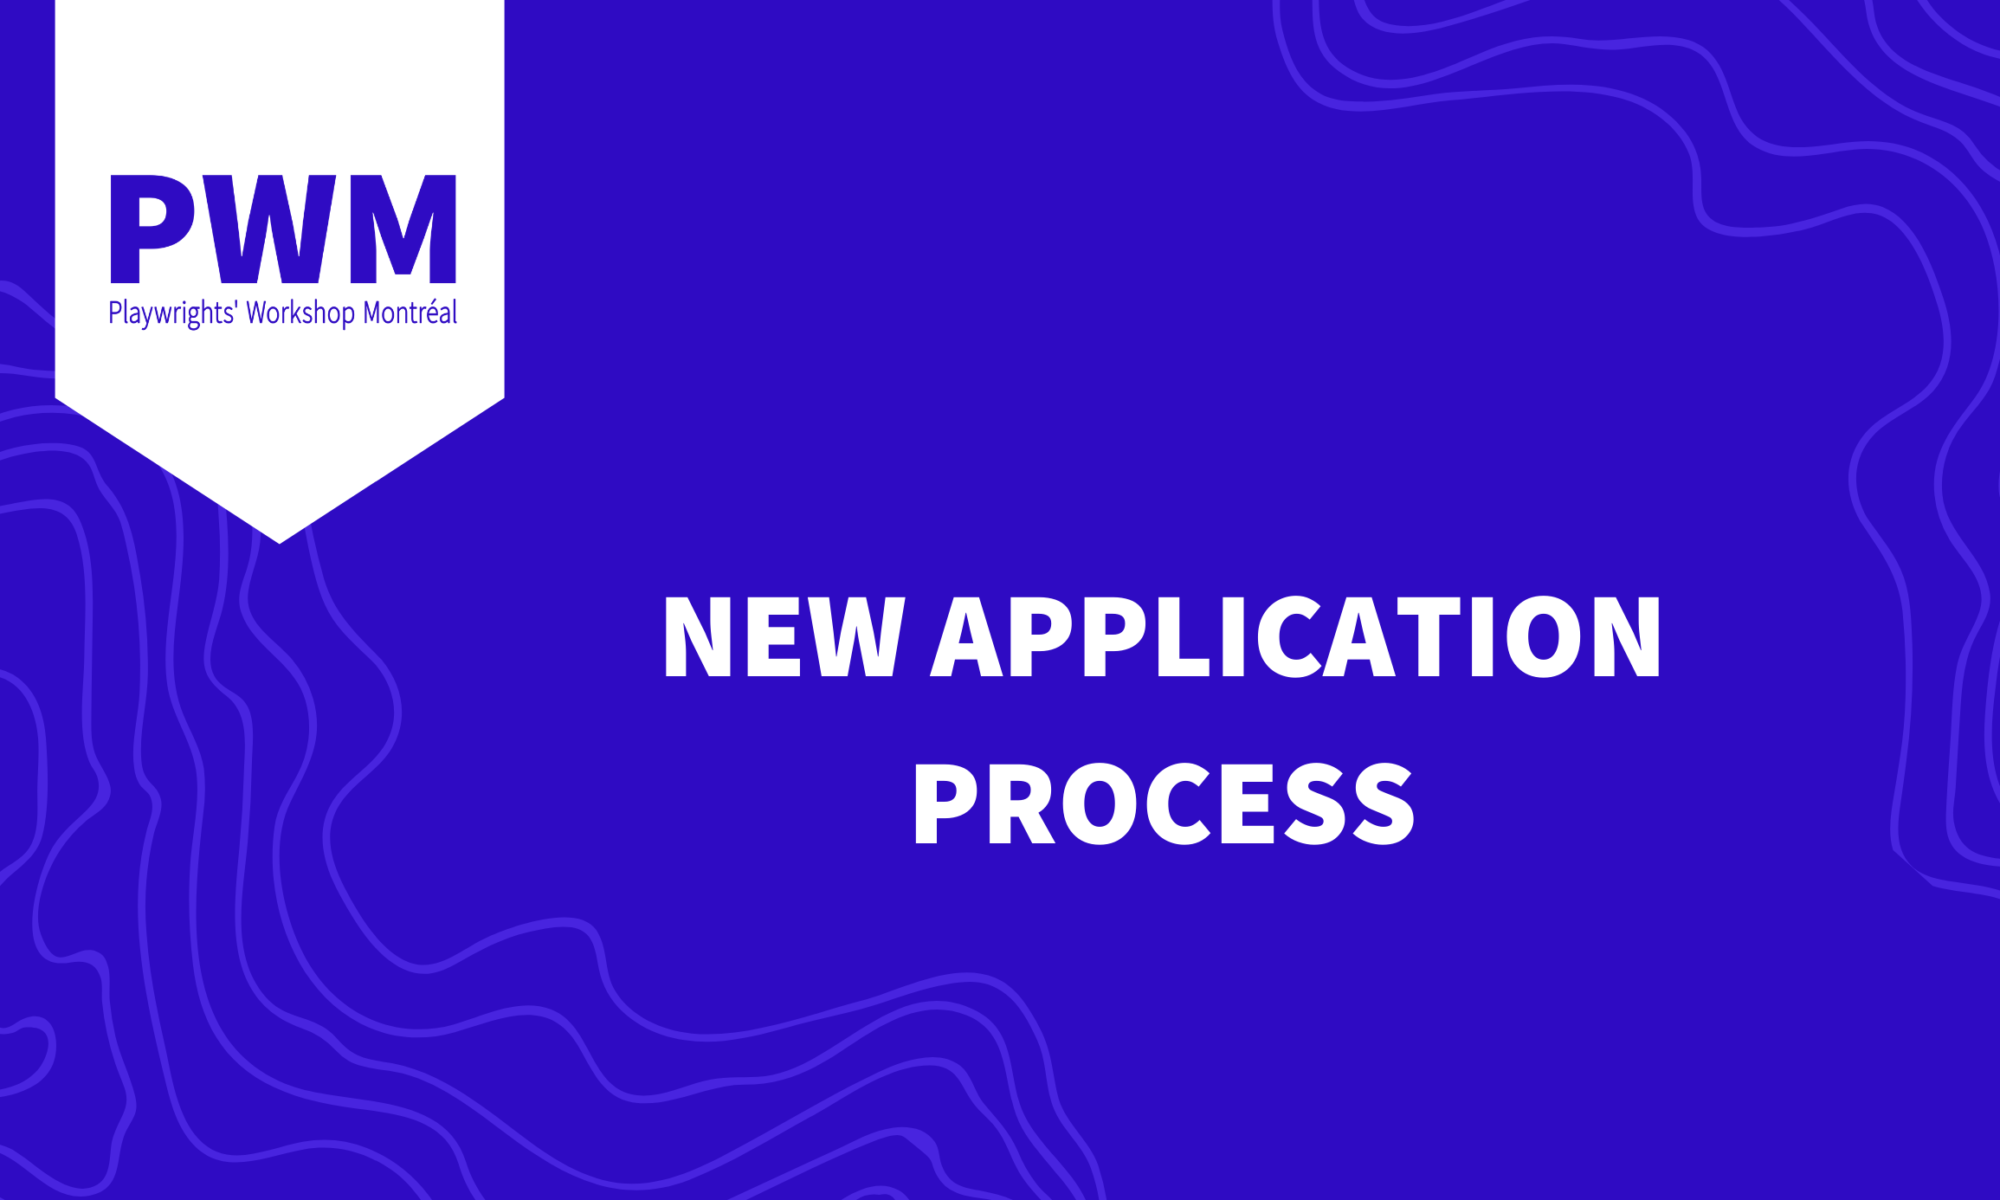 Image with text which reads: "New Application Process"